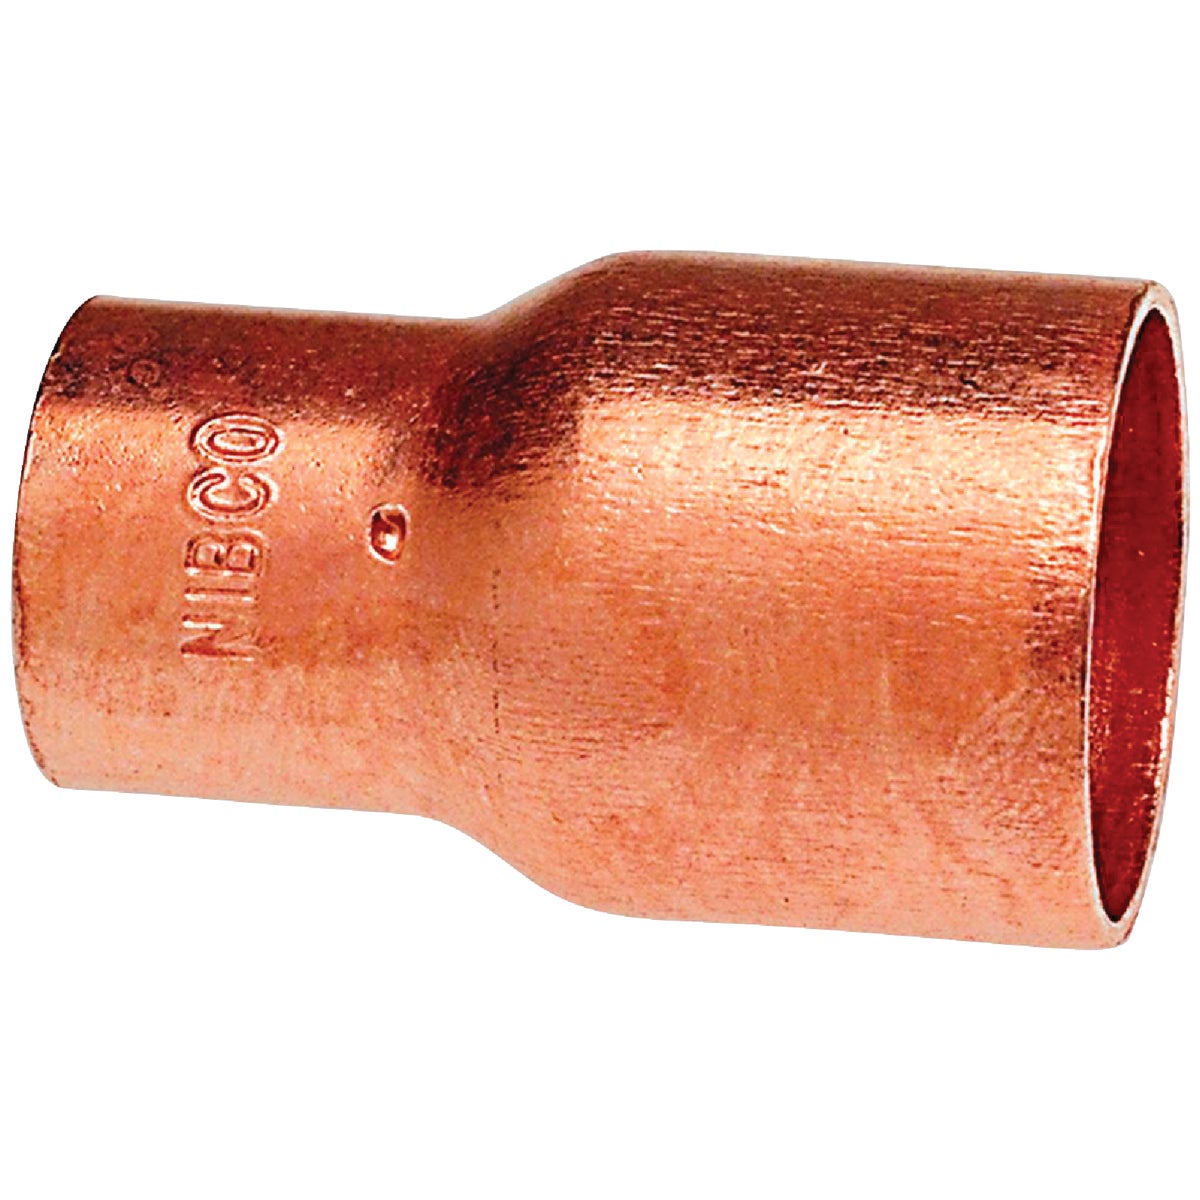 Item 455709, Coupling is copper to copper with stop.